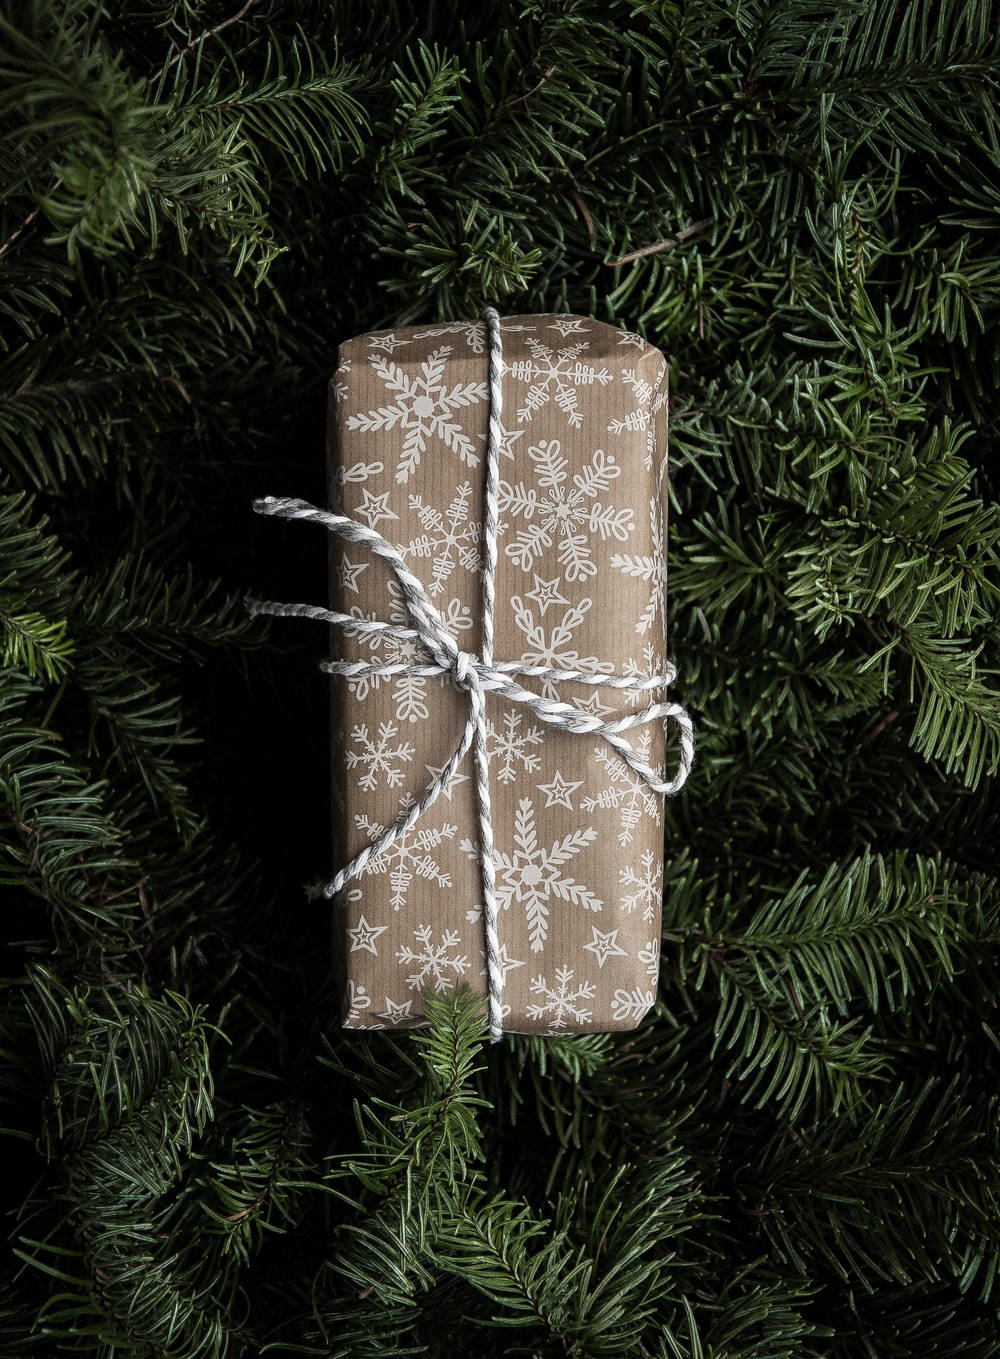 Festive Christmas Gift Wrapped In Brown And White